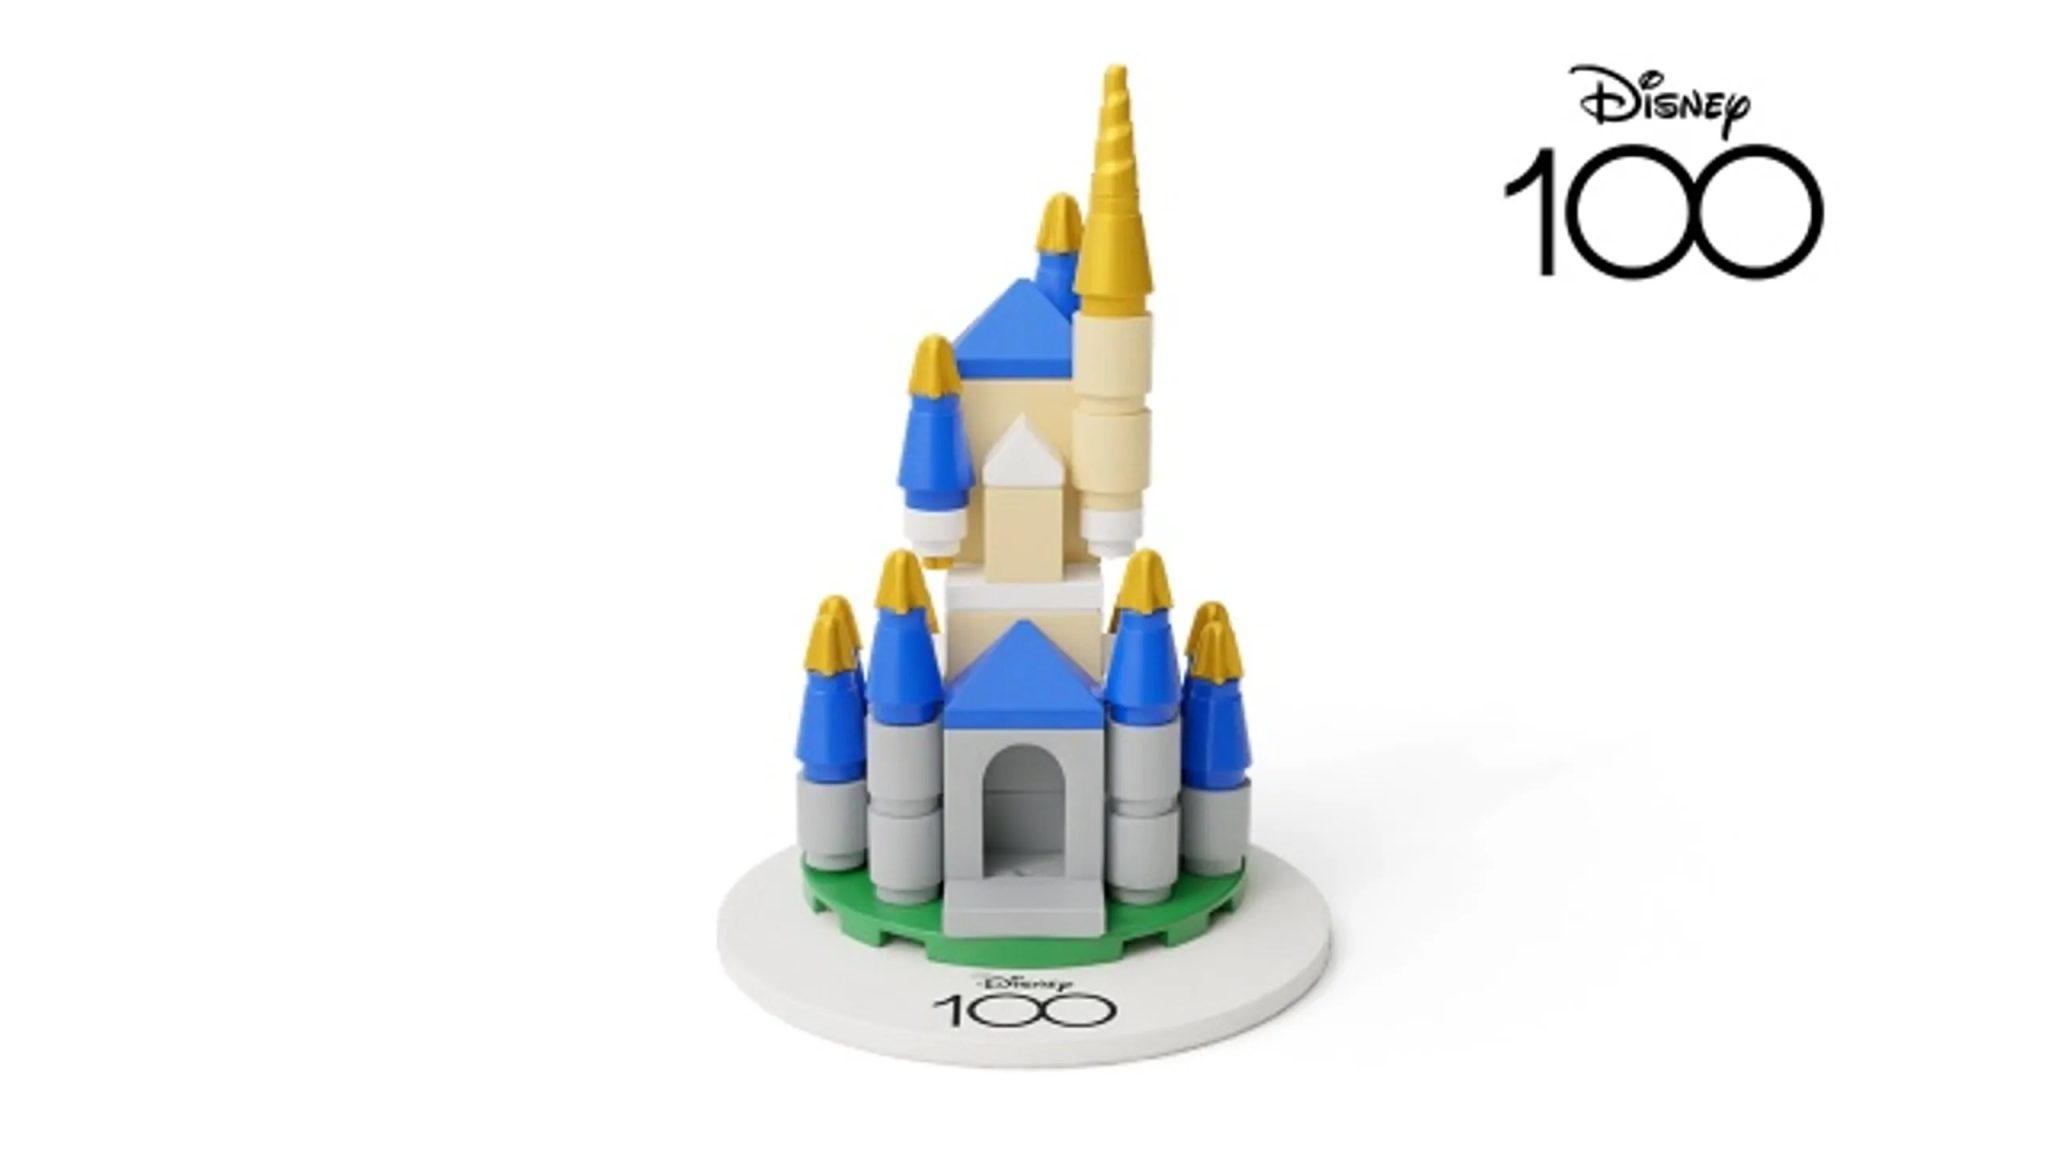 LEGO Toy Stores in UK & Europe Host Disney Themed Make & Take Event to Celebrate New LEGO Disney Castle Launch